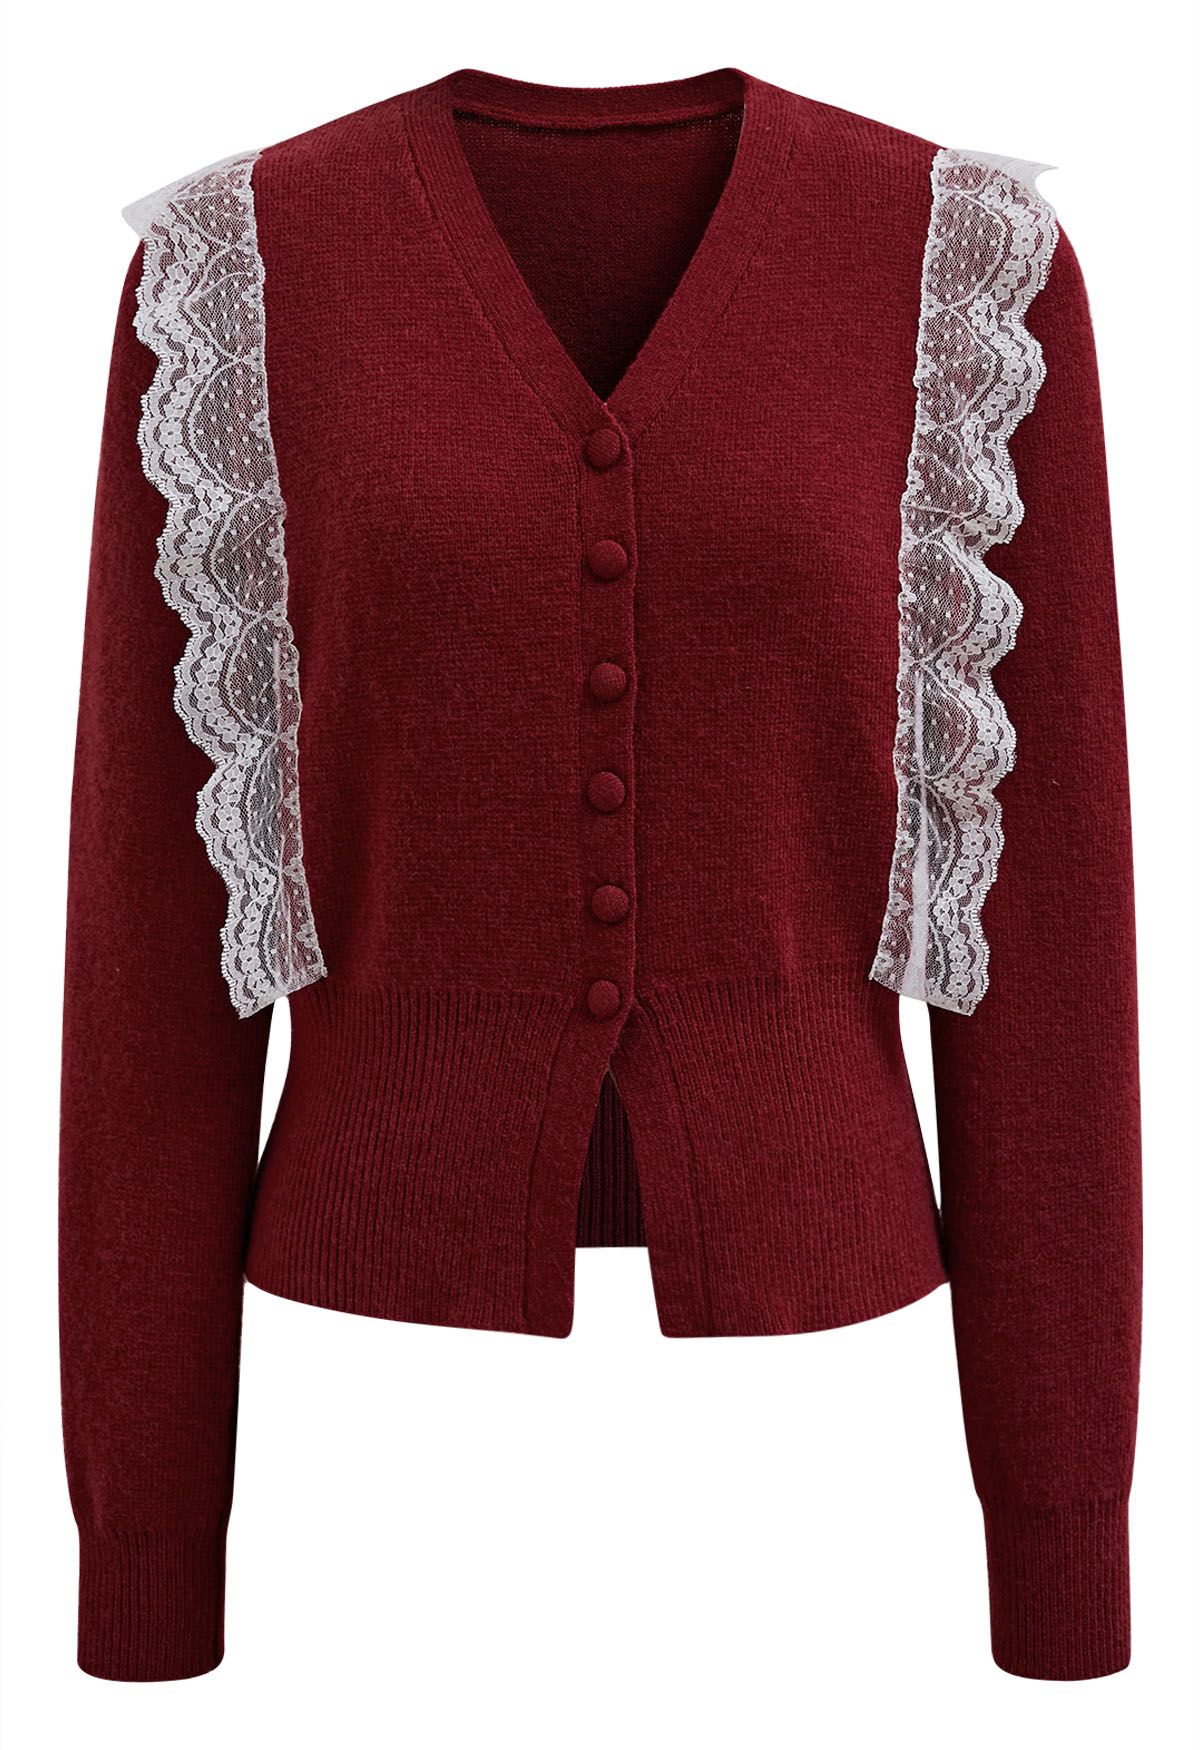 Lace Trimmed V-Neck Knit Cardigan in Red